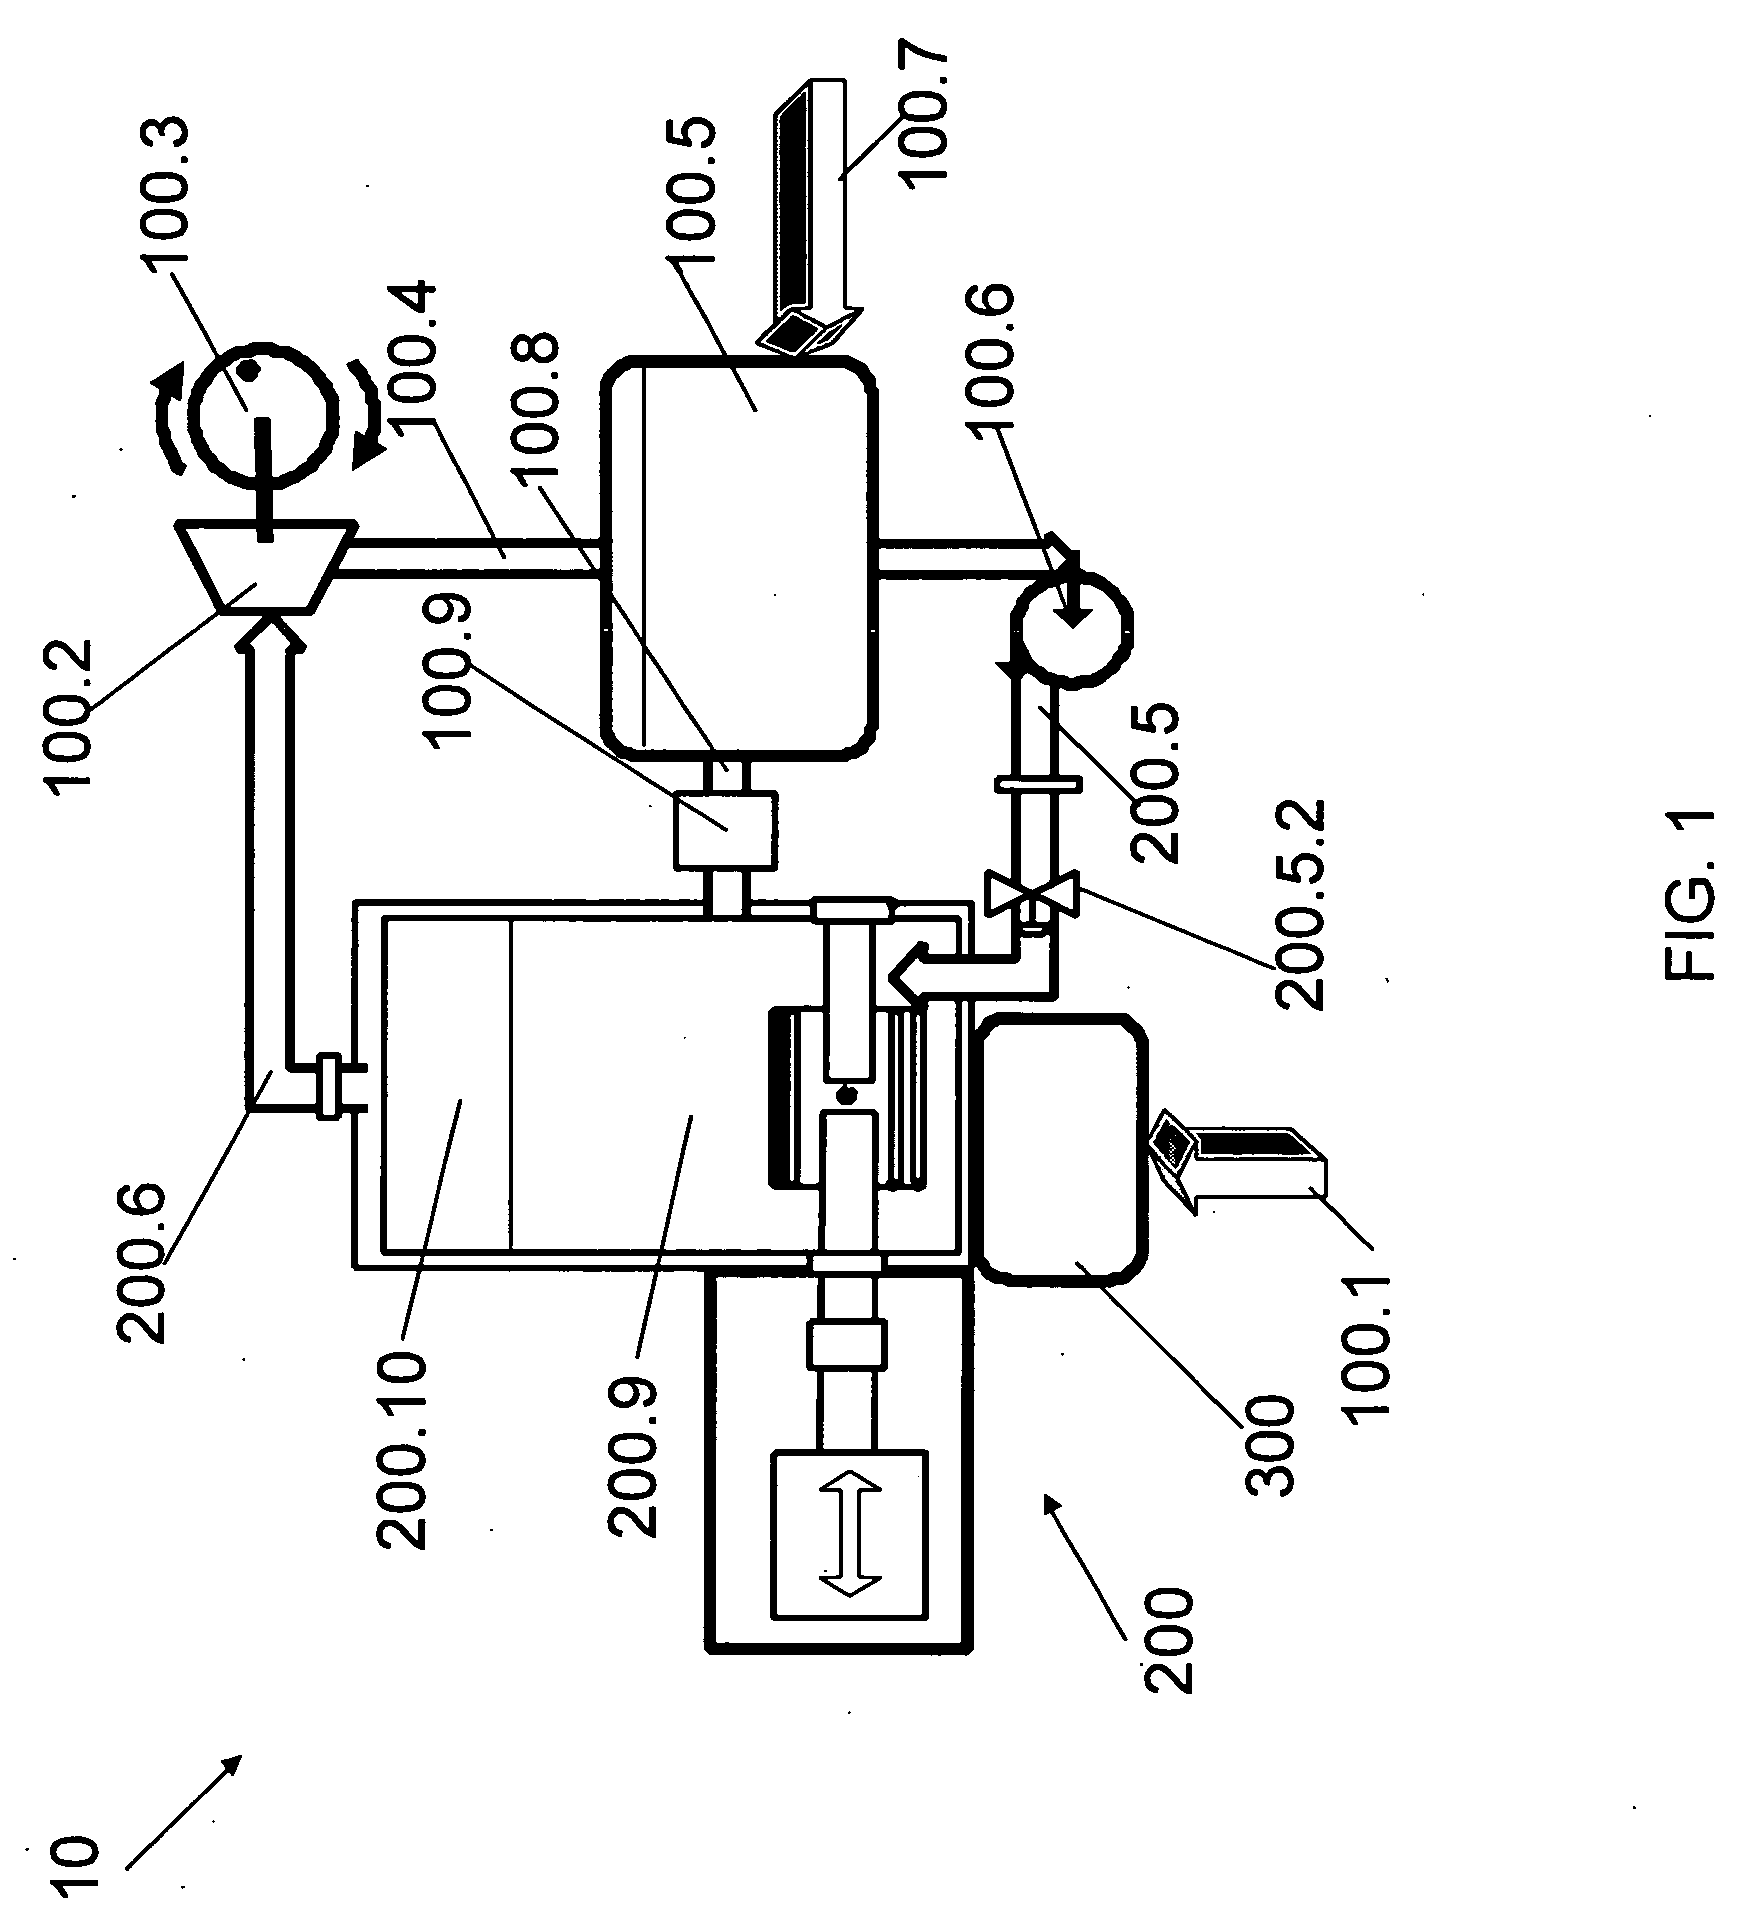 Arc-electrolysis steam generator with energy recovery, and method therefor